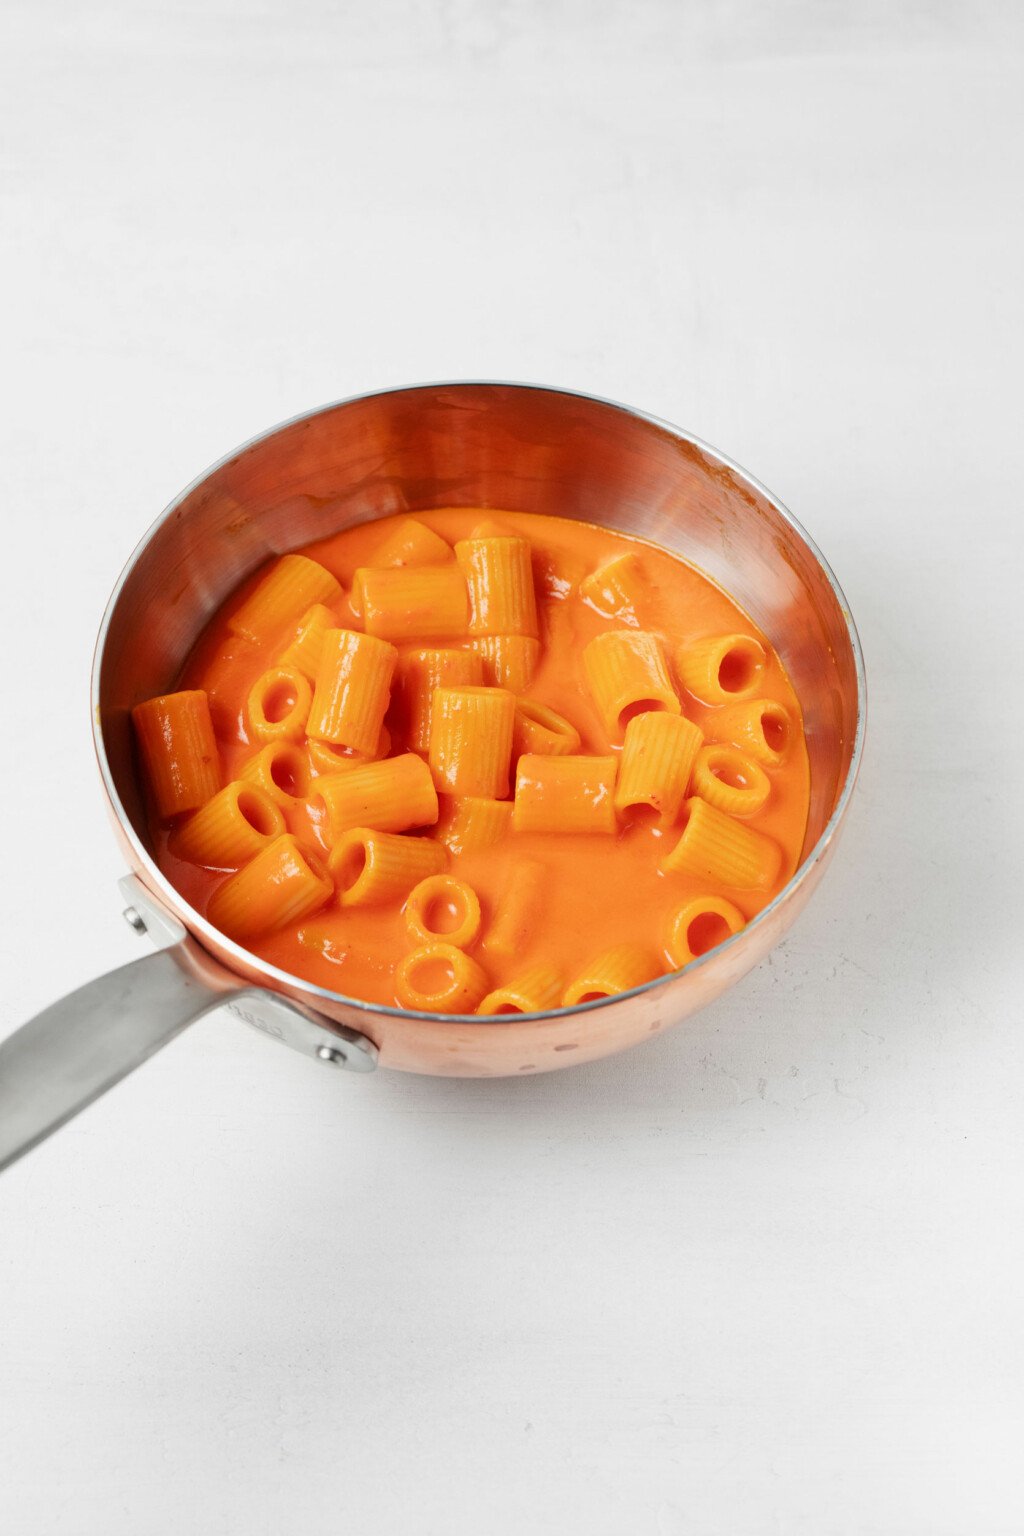 A small, stainless steel frying pan is being used to warm up a red pepper pasta with creamy sauce.